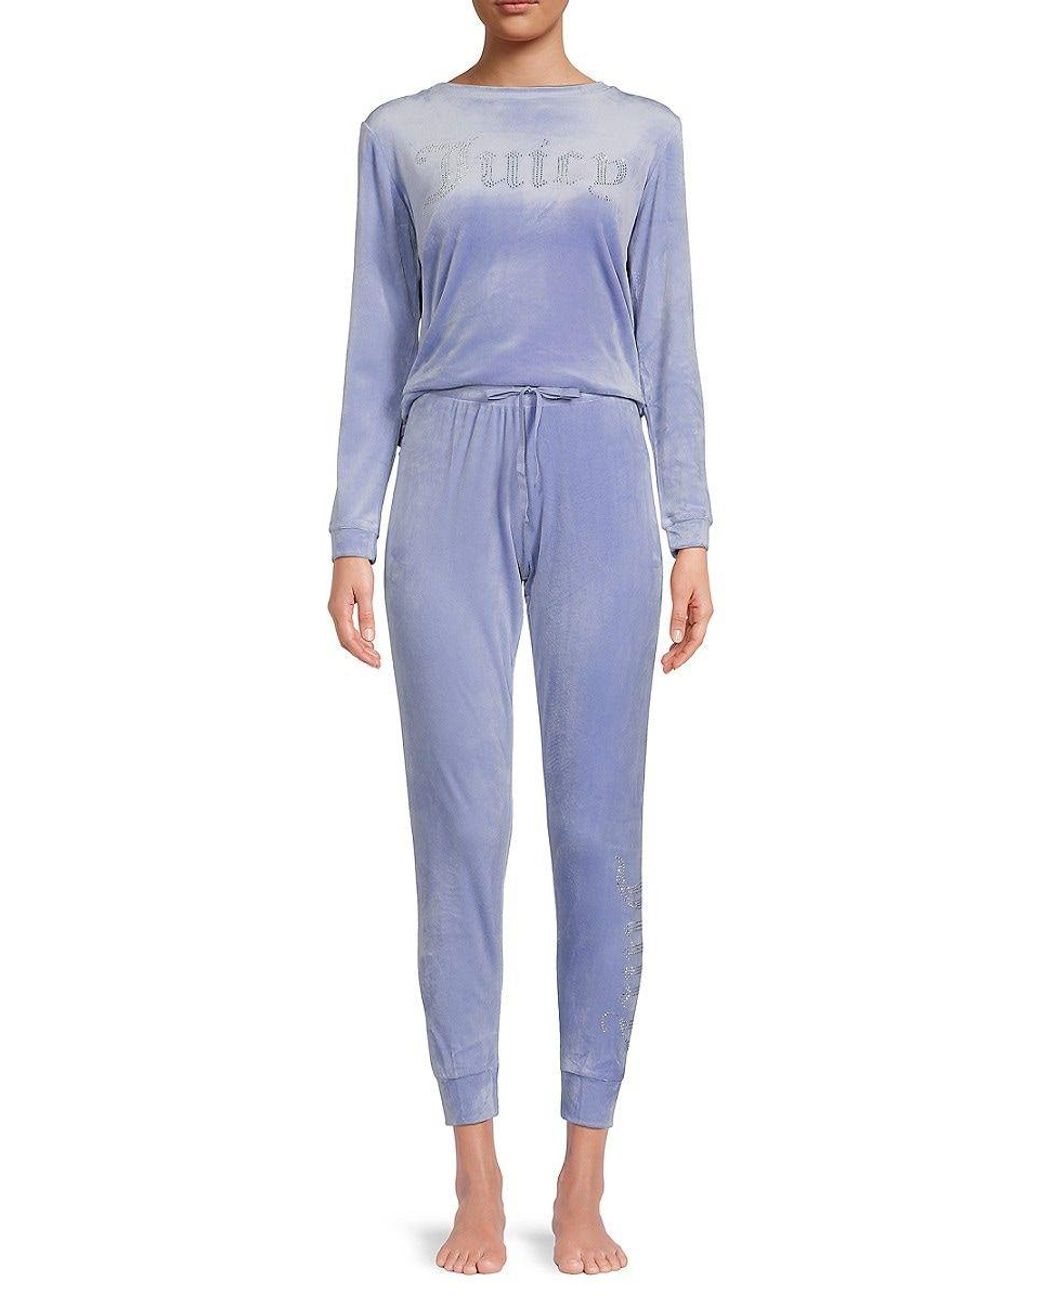 Juicy Couture Velour Pajama Set in Blue | Lyst